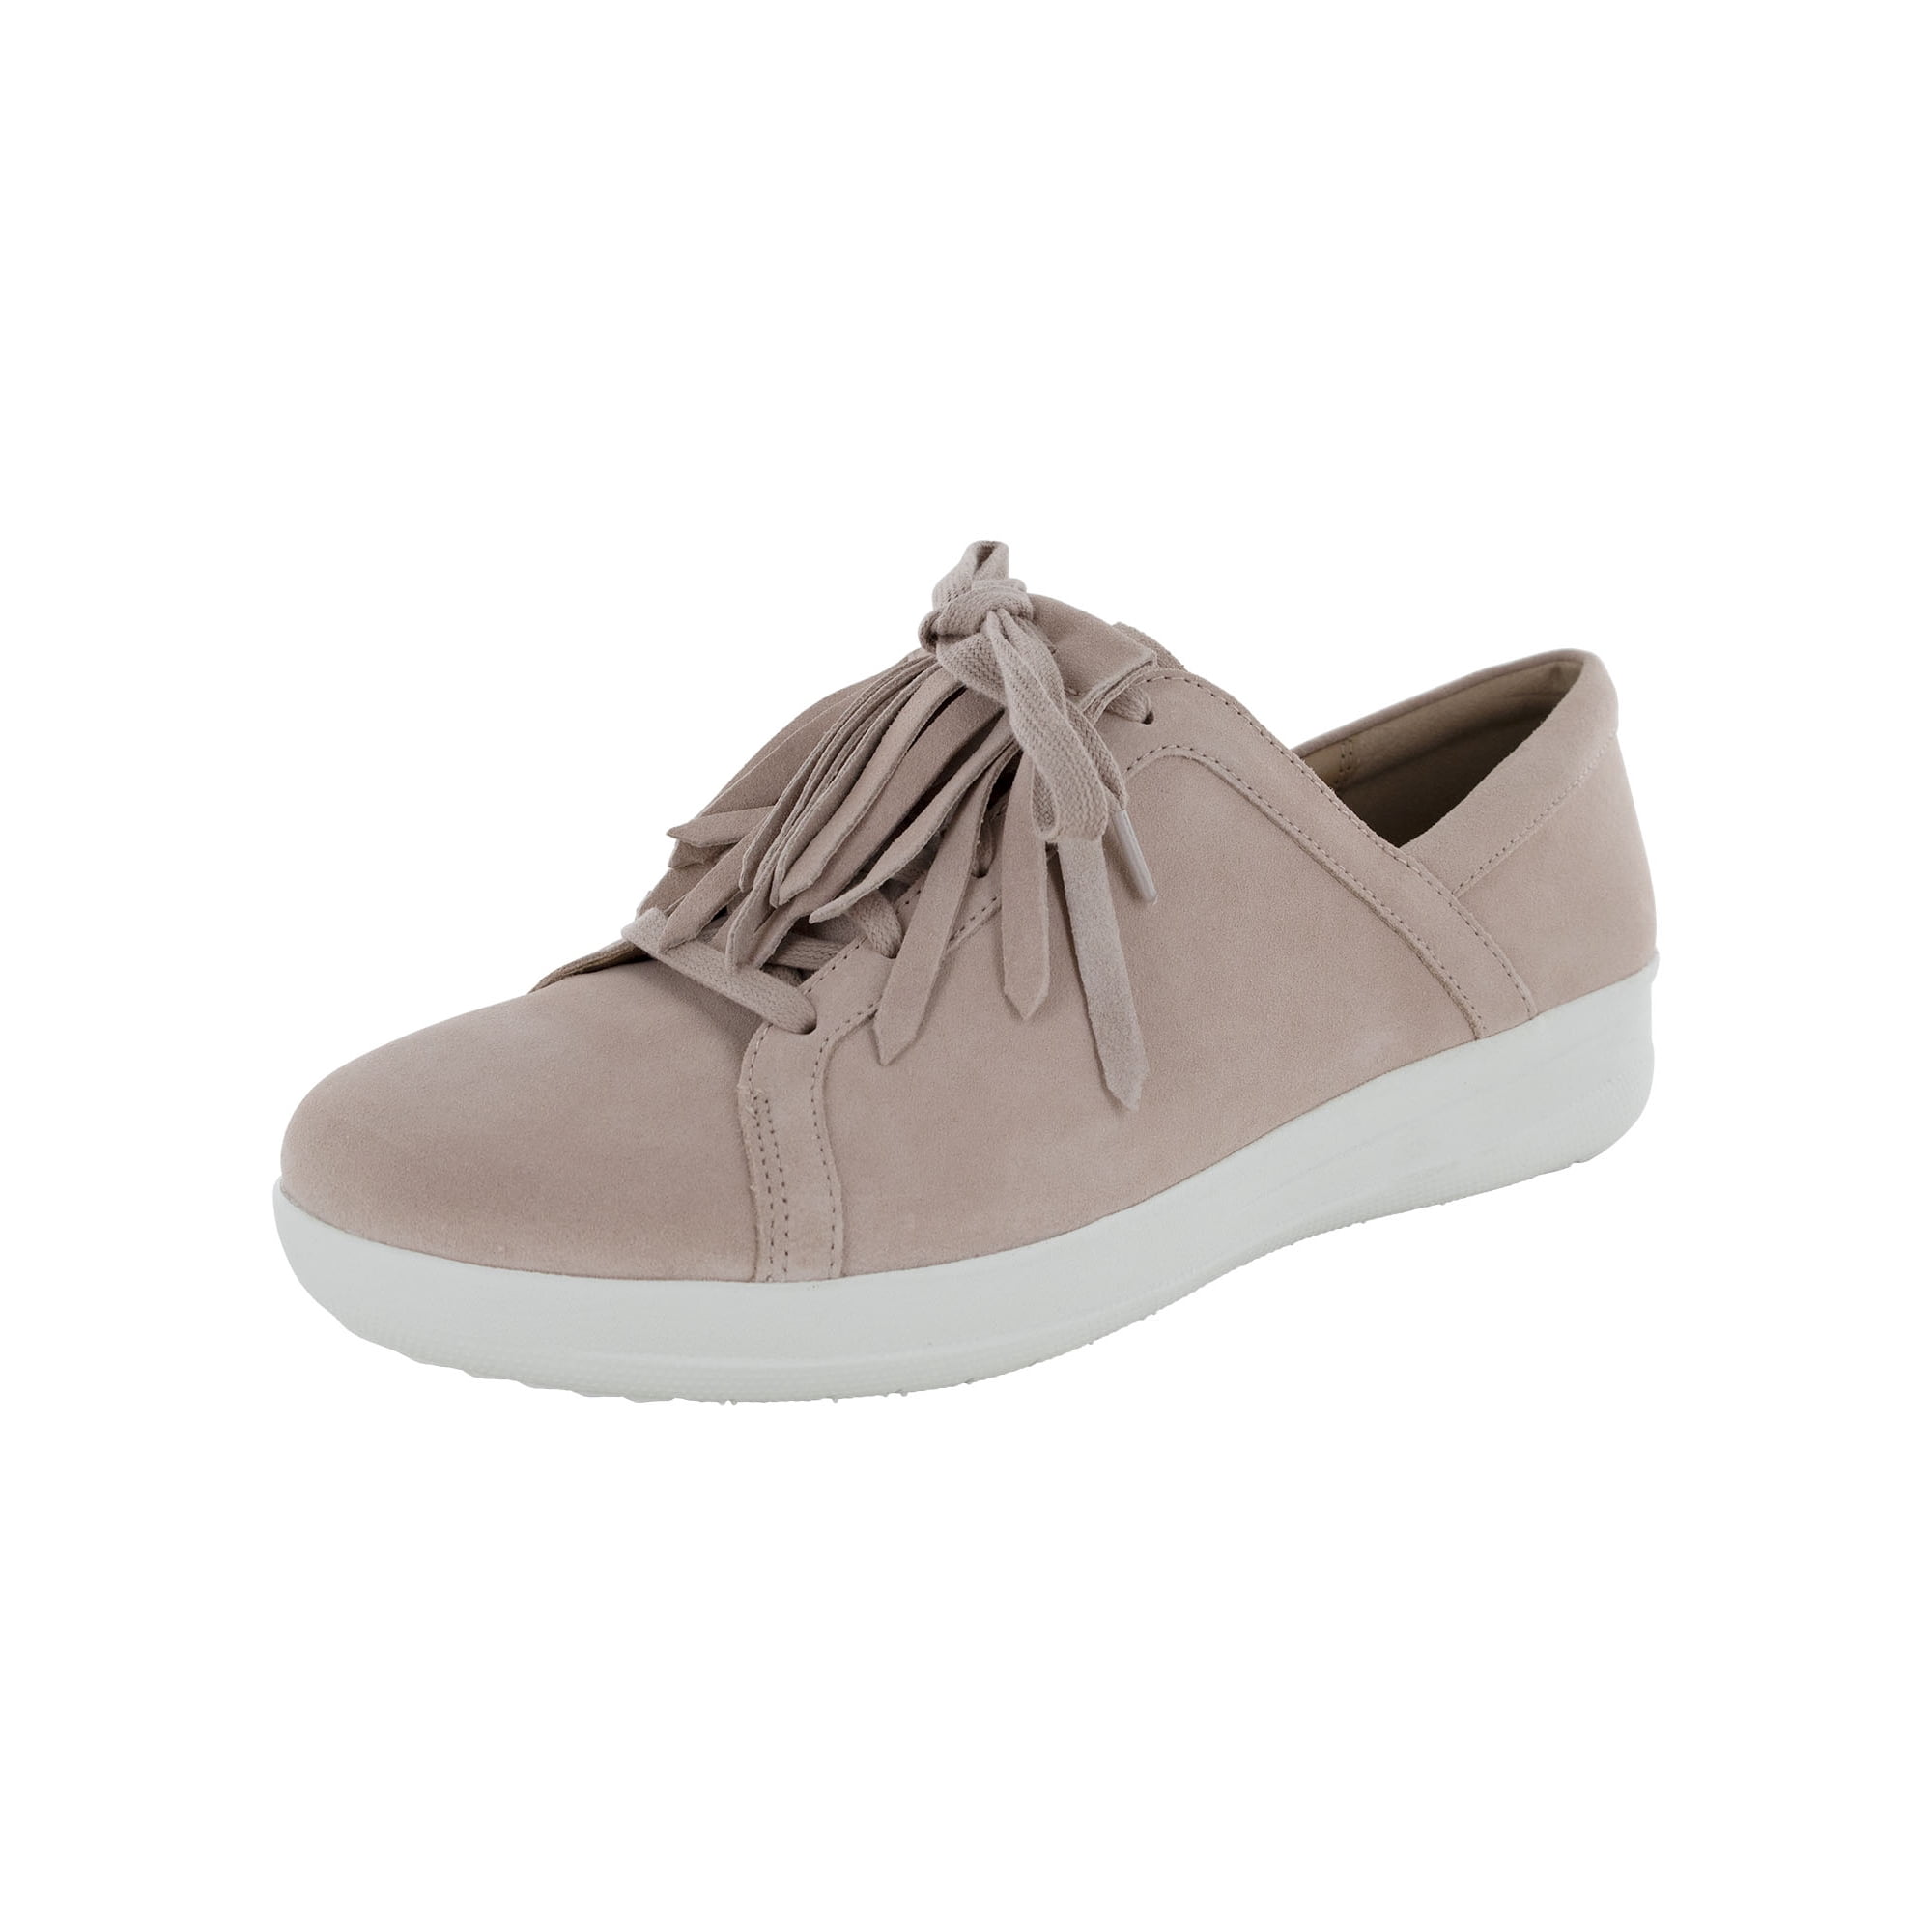 Fitflop Womens F-Sporty Lace Up Fringe Suede Sneakers, Dusky Pink, US - Walmart.com